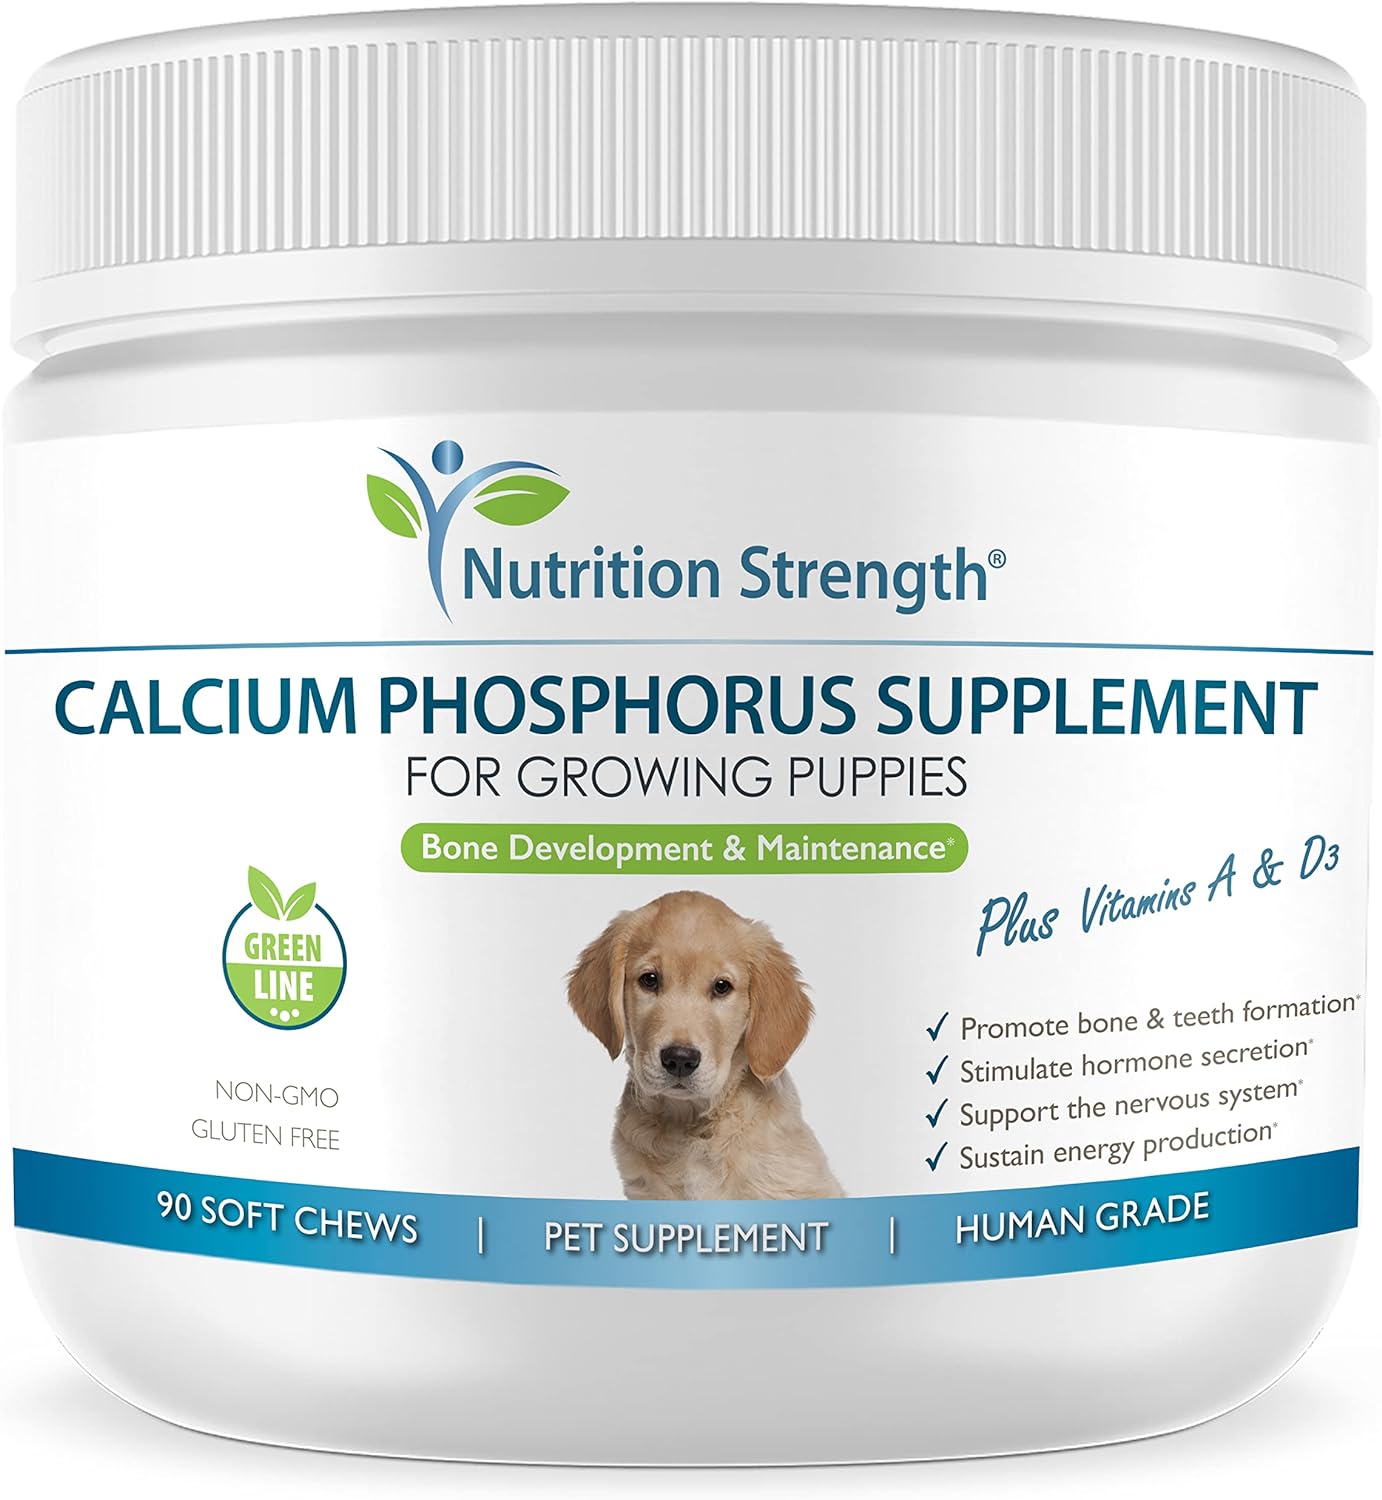 Calcium Phosphorus for Dogs Supplement, Provide Calcium for Puppies, Promote Healthy Dog Bones and Puppy Growth Rate, Dog Bone Supplement, 90 Soft Chews